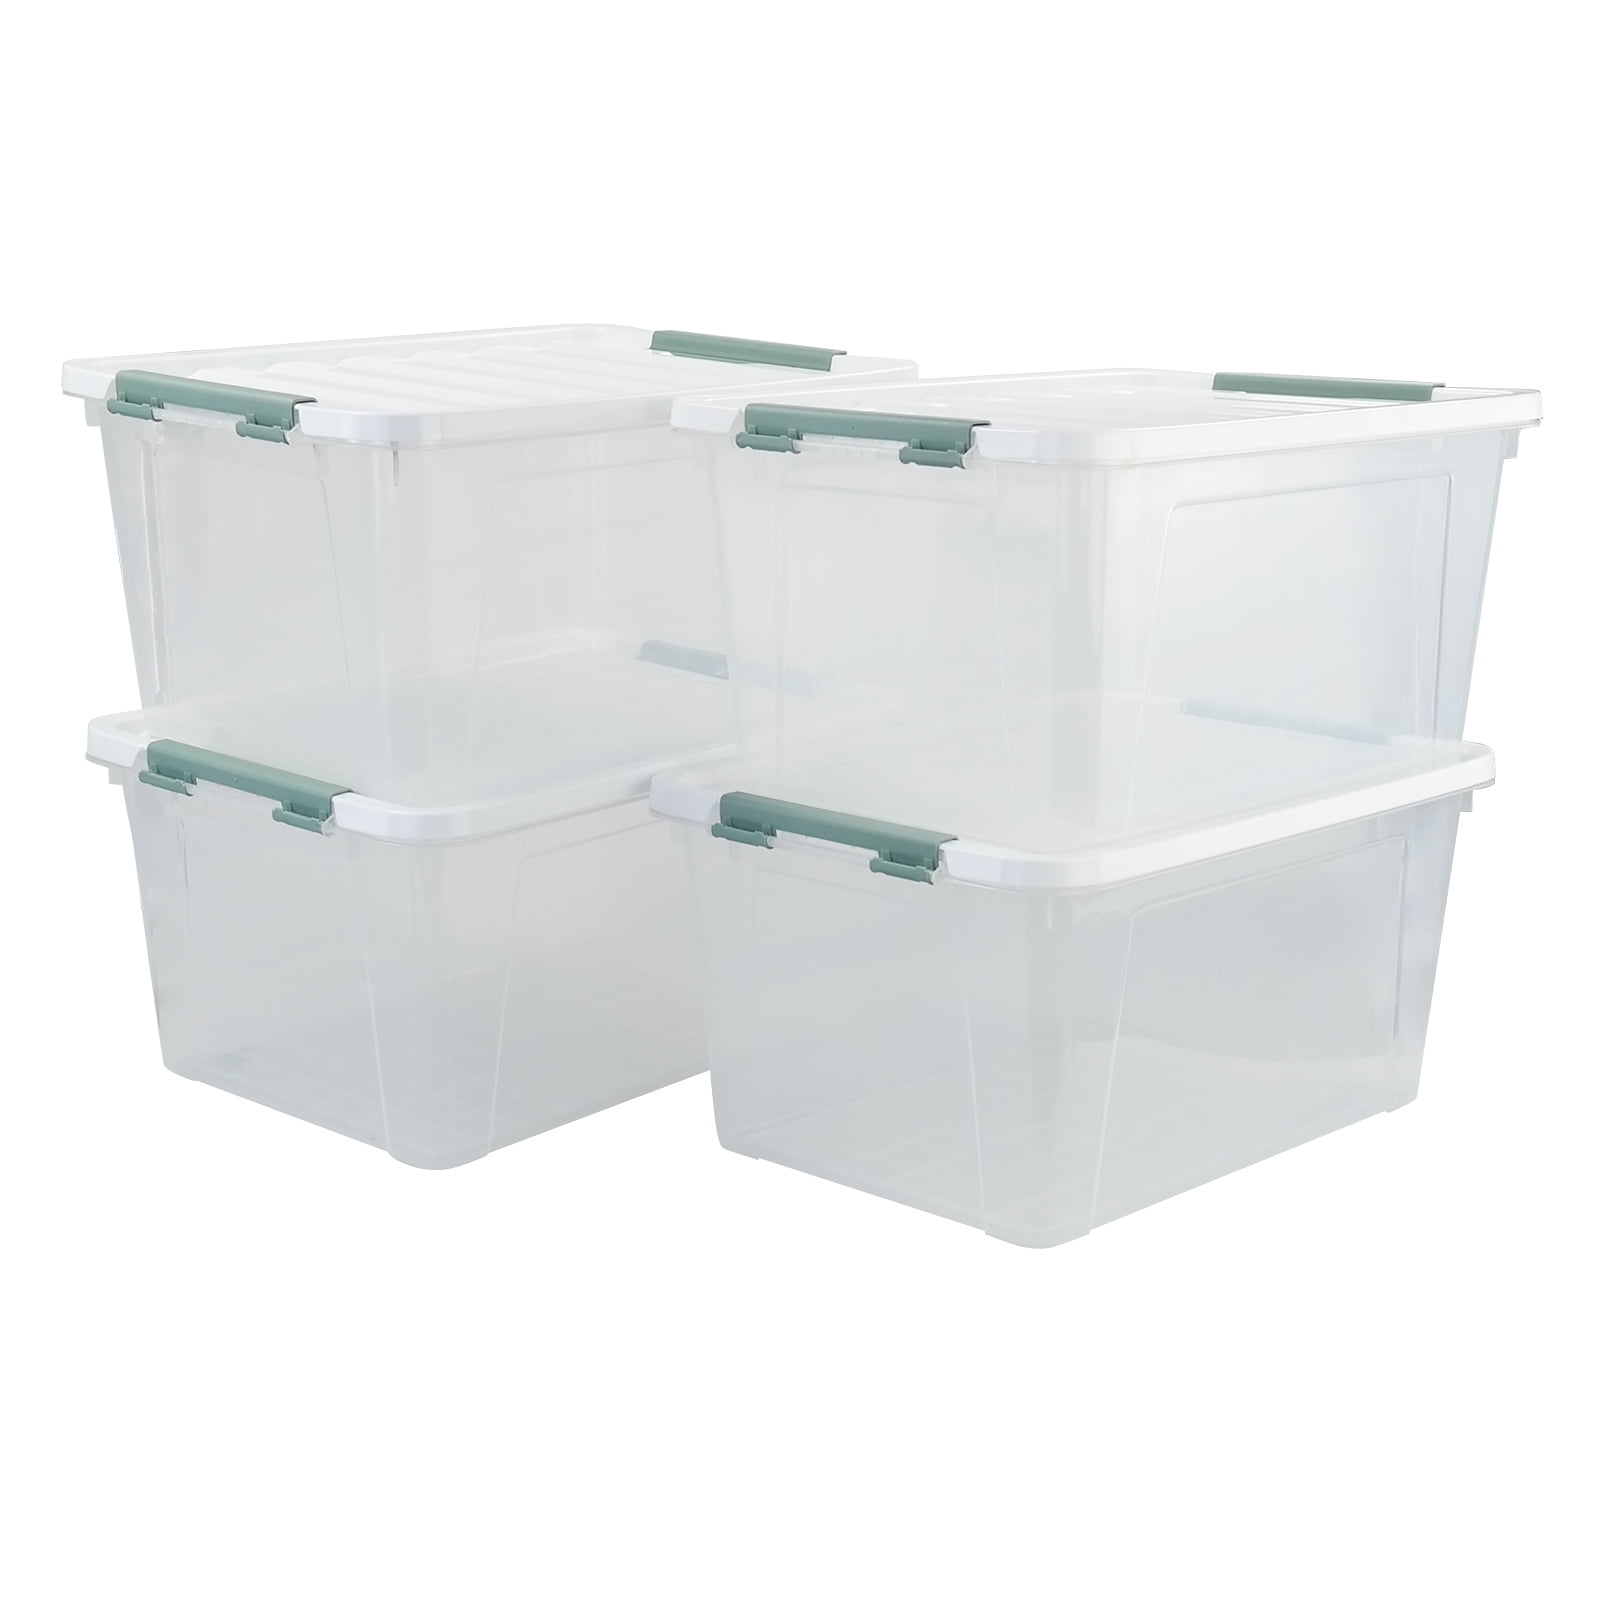 Yarebest 35 Liters Large Storage Boxes, Plastic Clear Latching Organizer  Tote Bins Set of 4